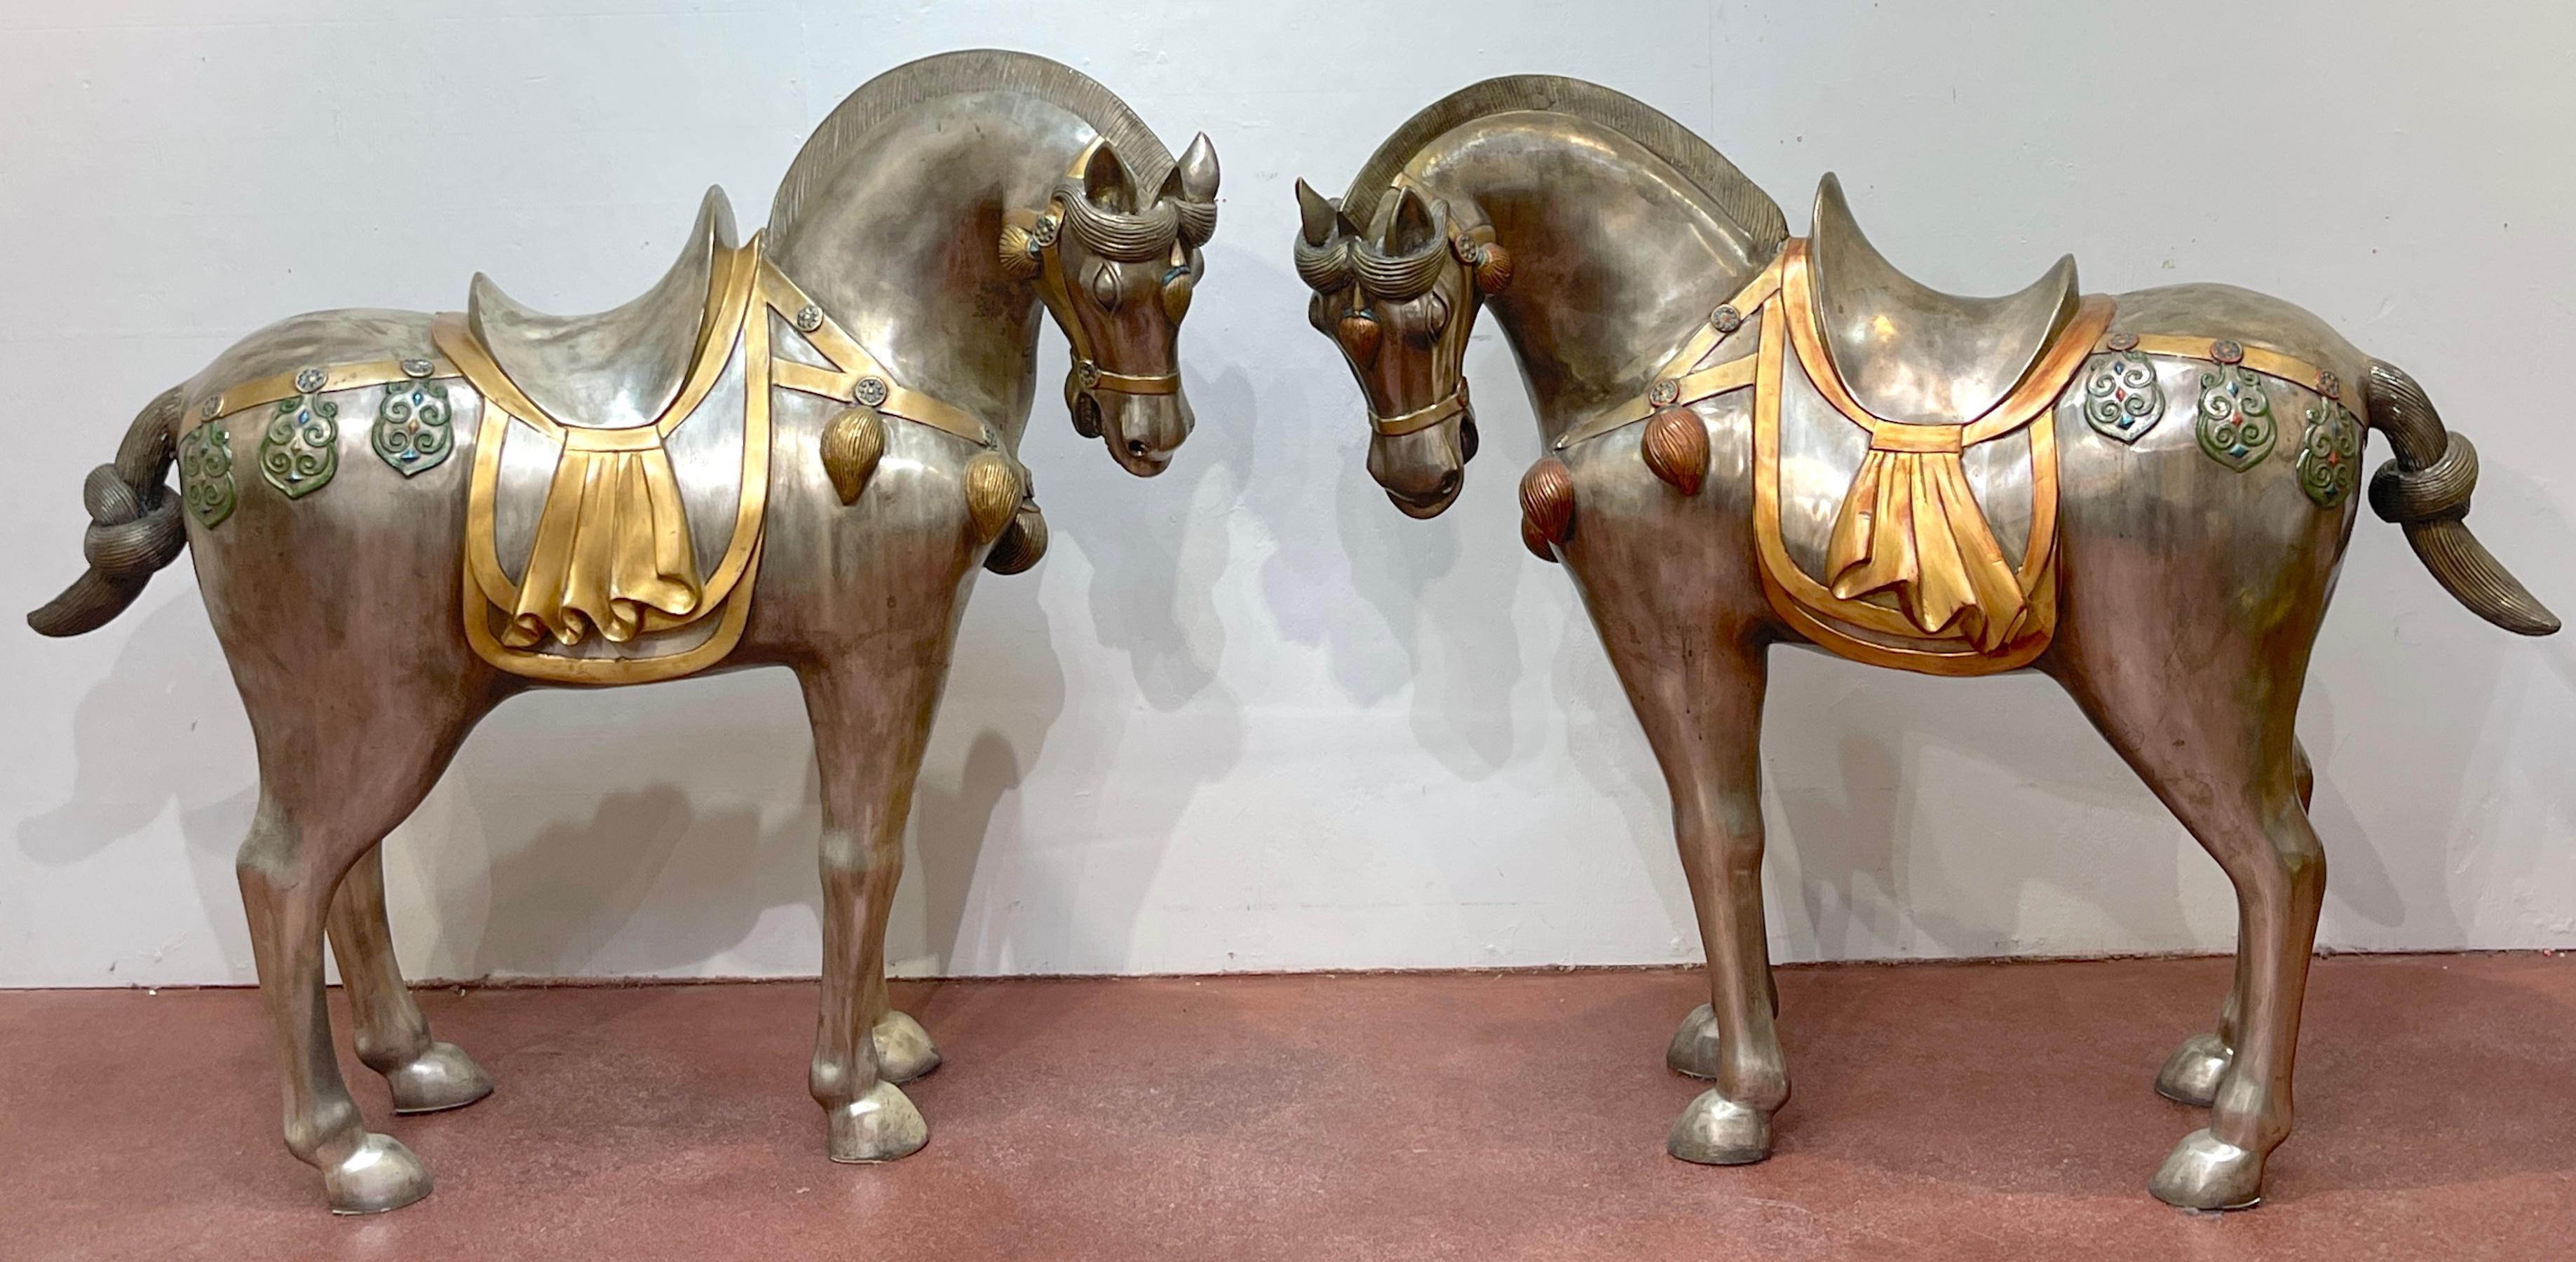 Massive Pair of Mid Century Silvered Bronze and Enameled Tang Style Horses, Style of Tony Duquette
Late 20th Century

Presenting an exceptional find: a pair of Mid Century Silvered Bronze and Enameled Tang Style Horses, featuring the distinctive